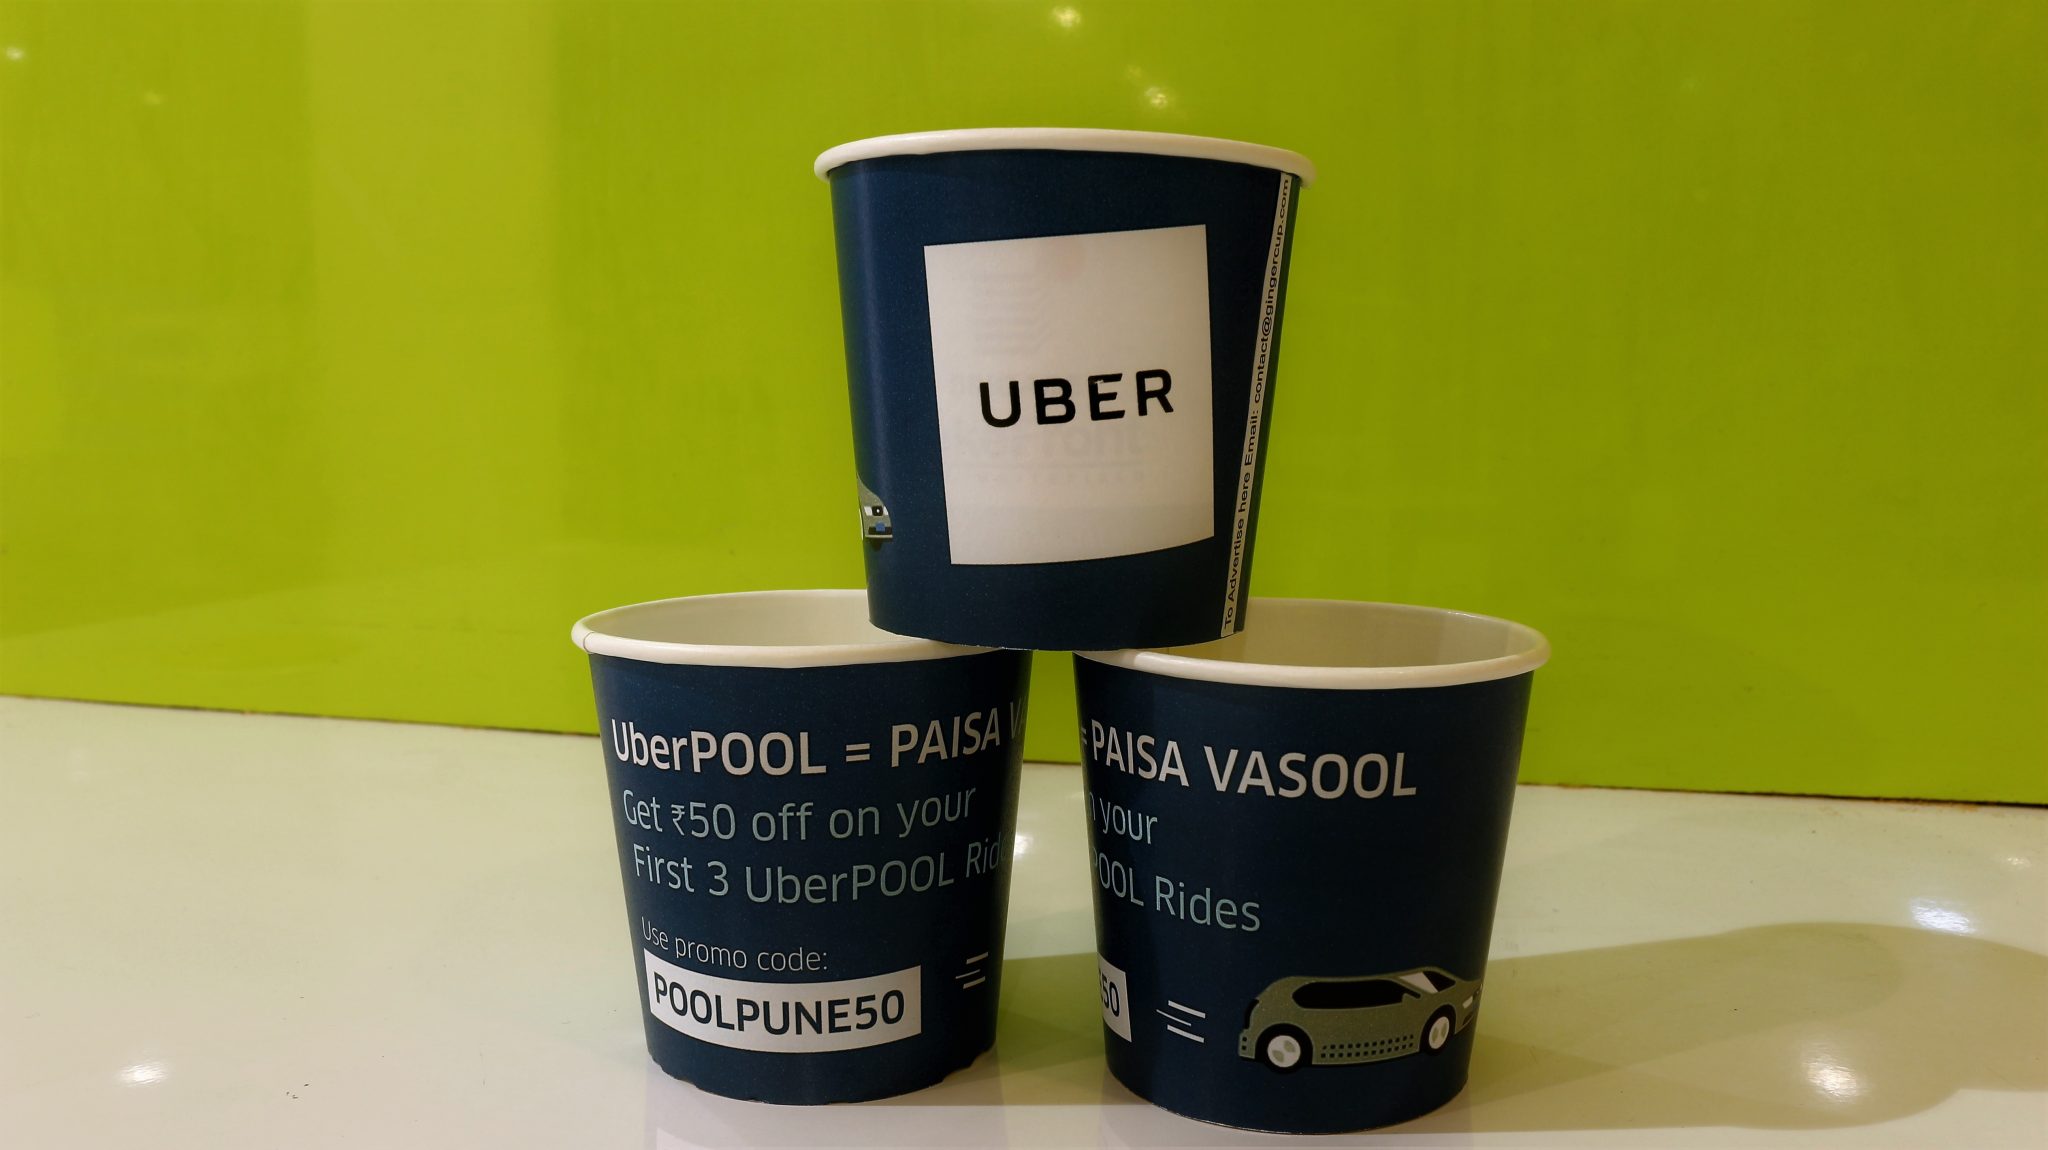 uberpool paper cup advertising campaign with offers and promo codes gingercup